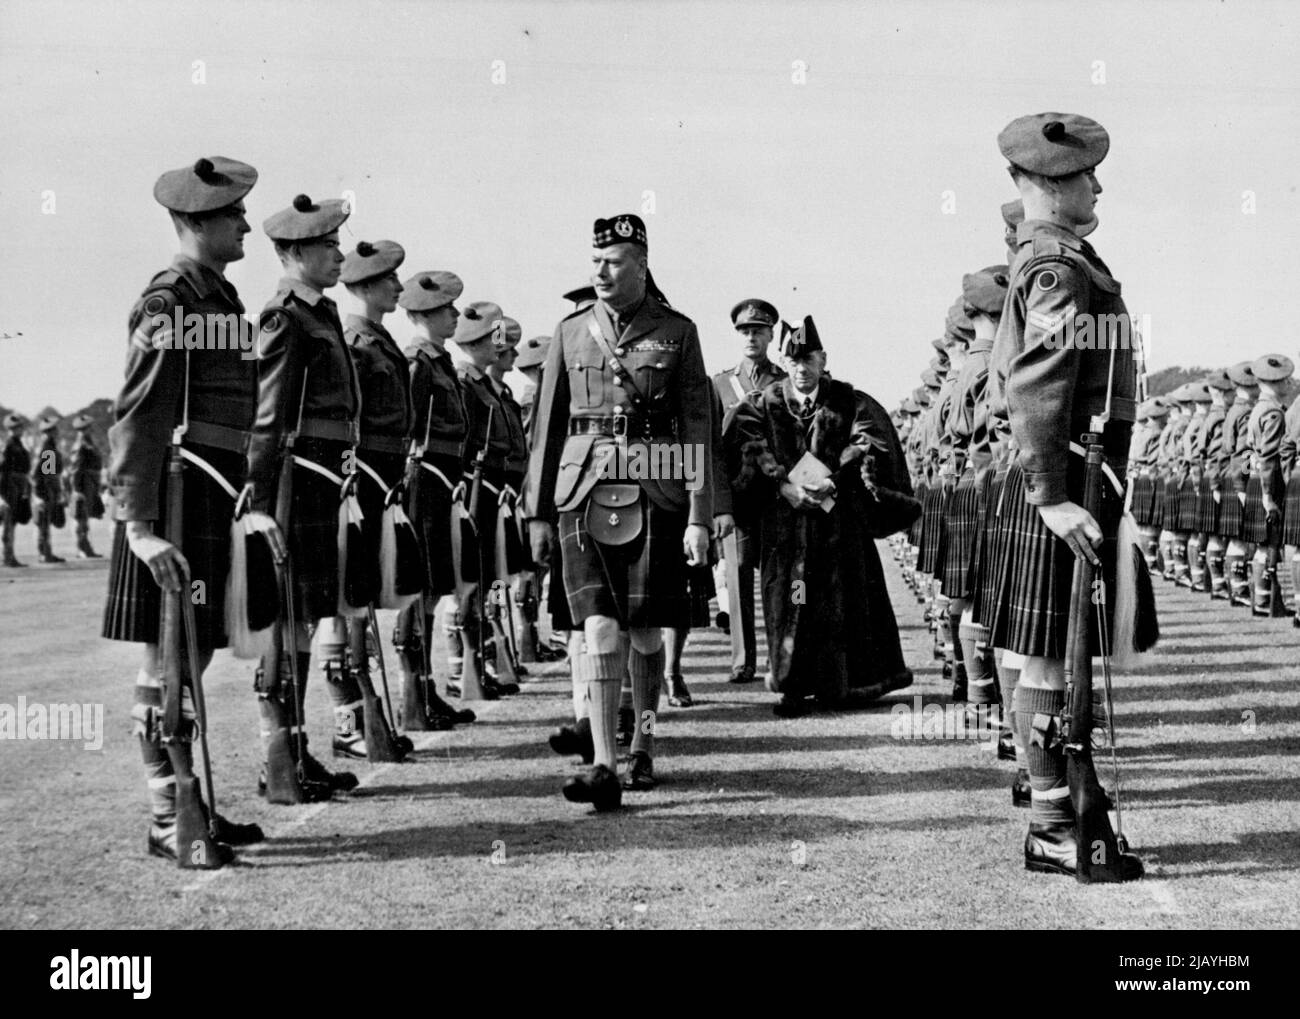 Freedom of City for Gordon Highlander -- The Duke of Gloucester the Gordon Highlanders at Harlaw Field, Aberdeen. H.R.H. The Duke of Gloucester, as Colonel-in-chief, accepted the Freedom of the City of Aberdeen on behalf of the Gordon Highlanders on Saturday. August 22, 1949. (Photo by Fox) Stock Photo